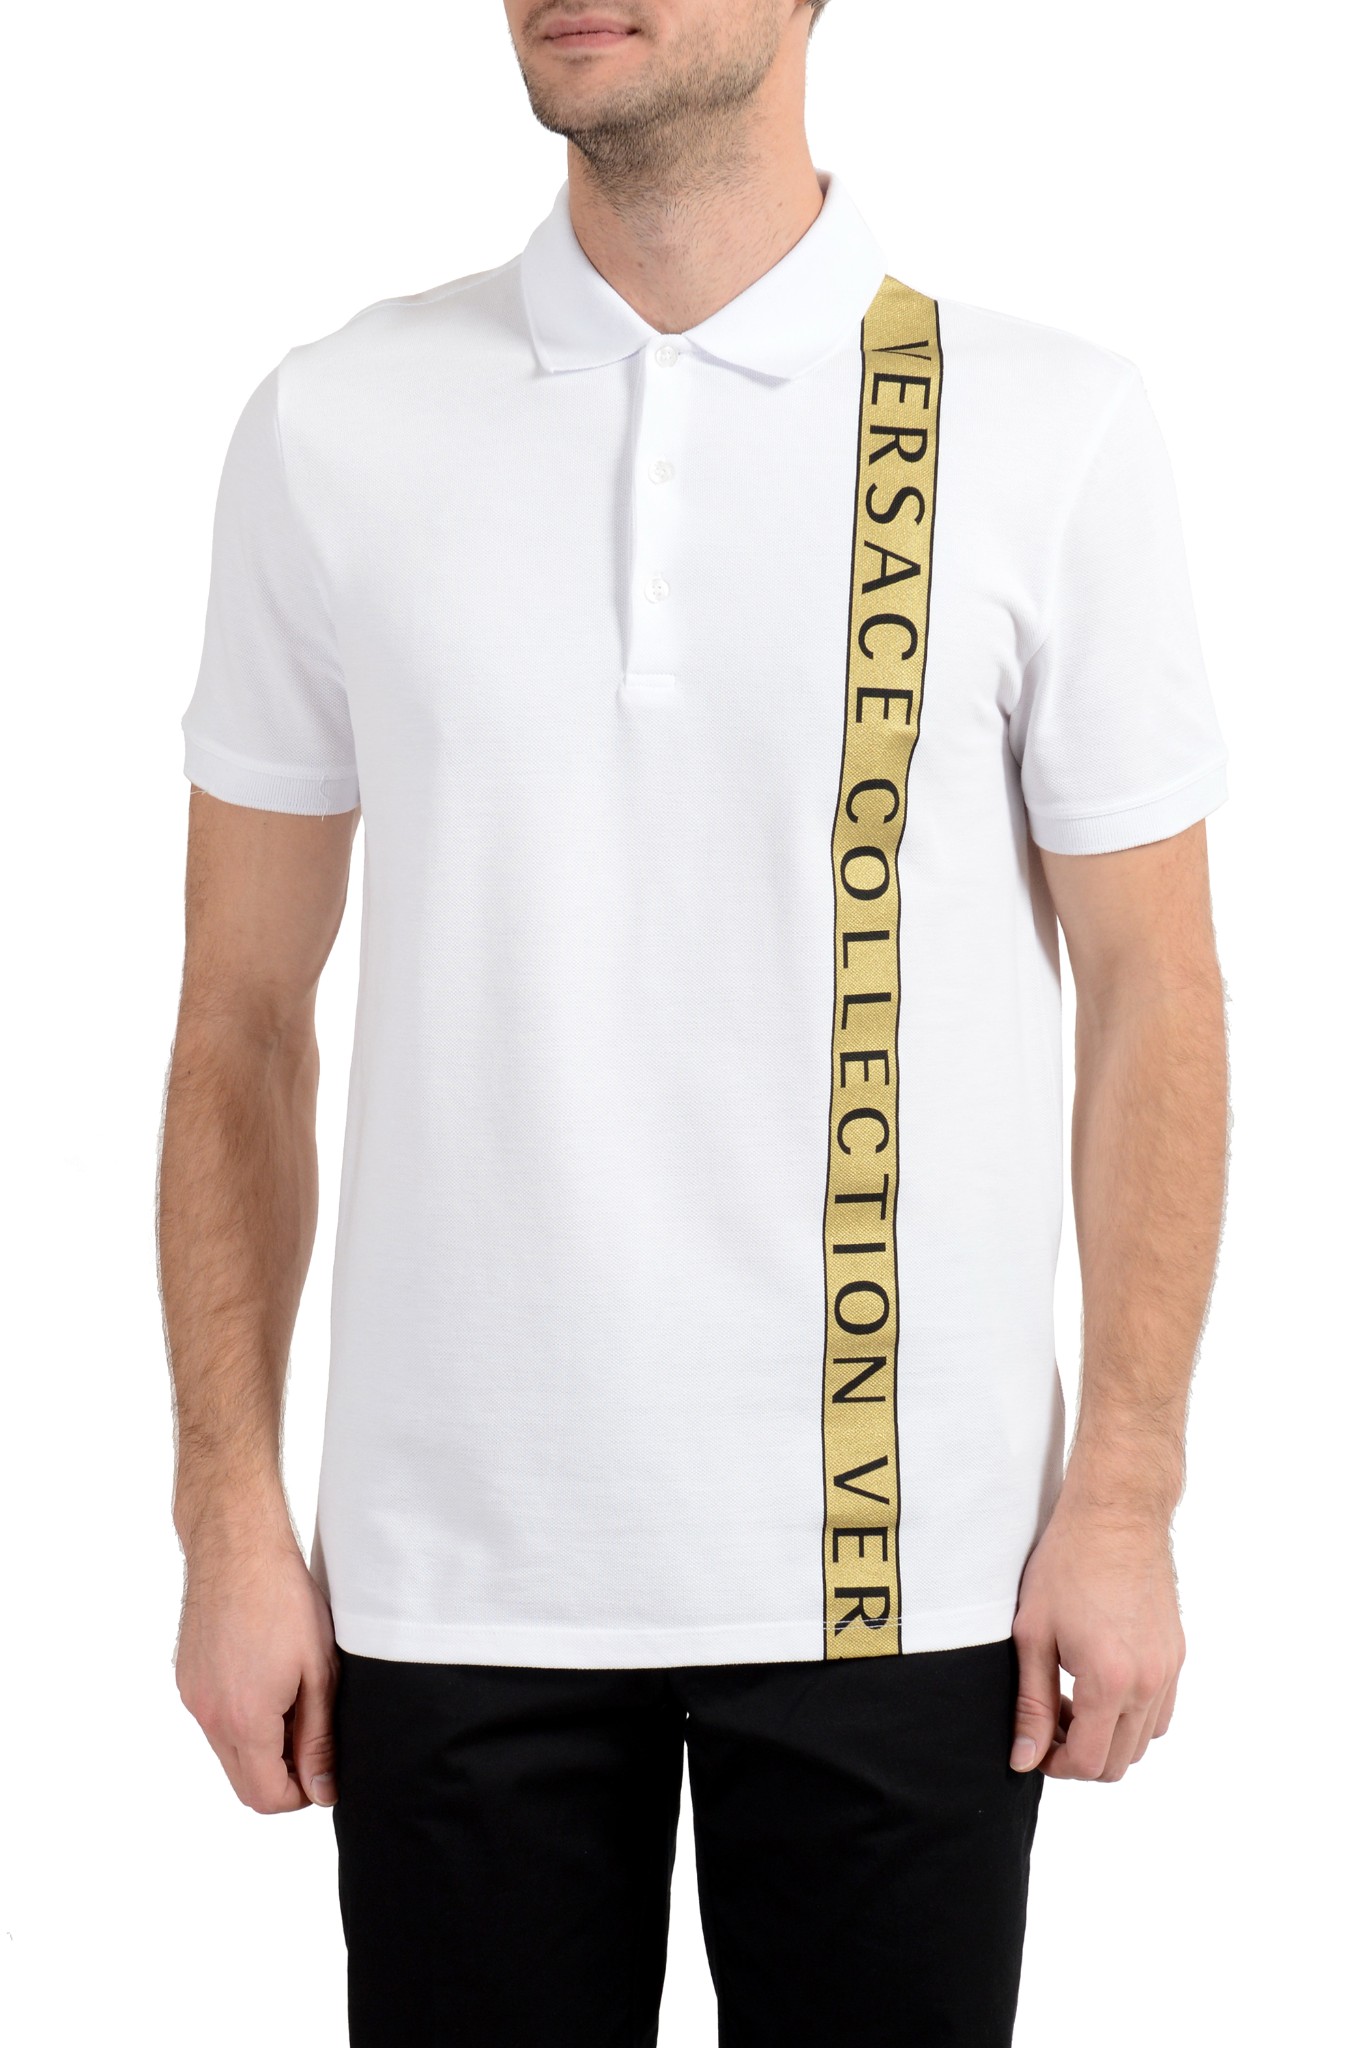 versace collection white shirt